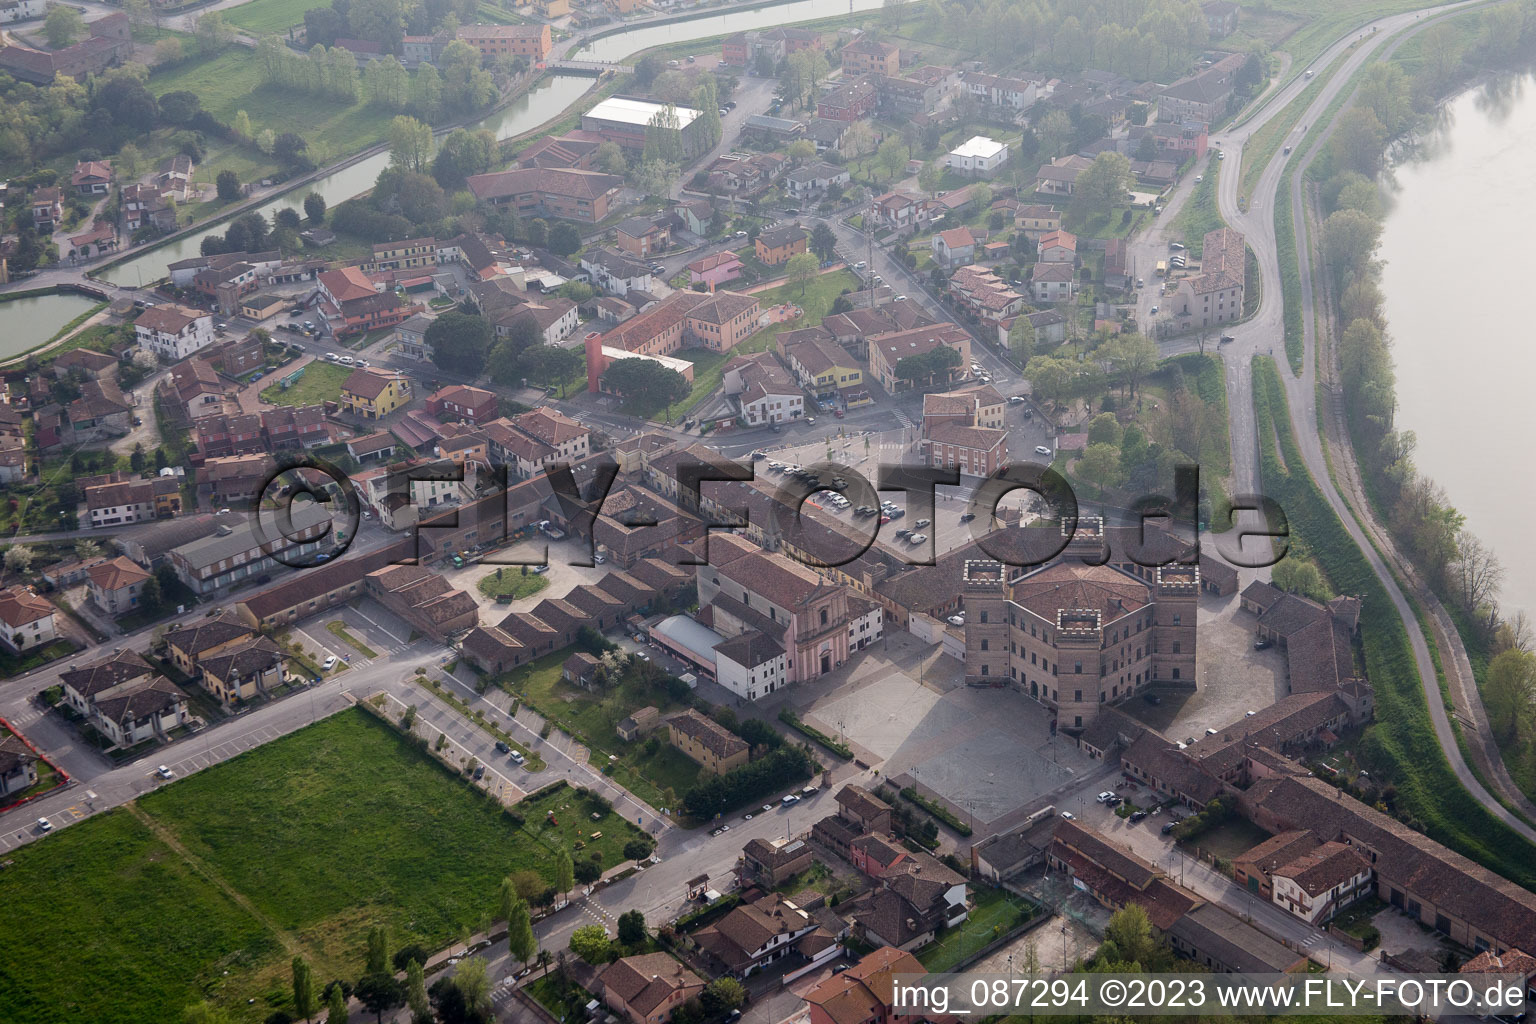 Aerial photograpy of Mesola in the state Emilia Romagna, Italy